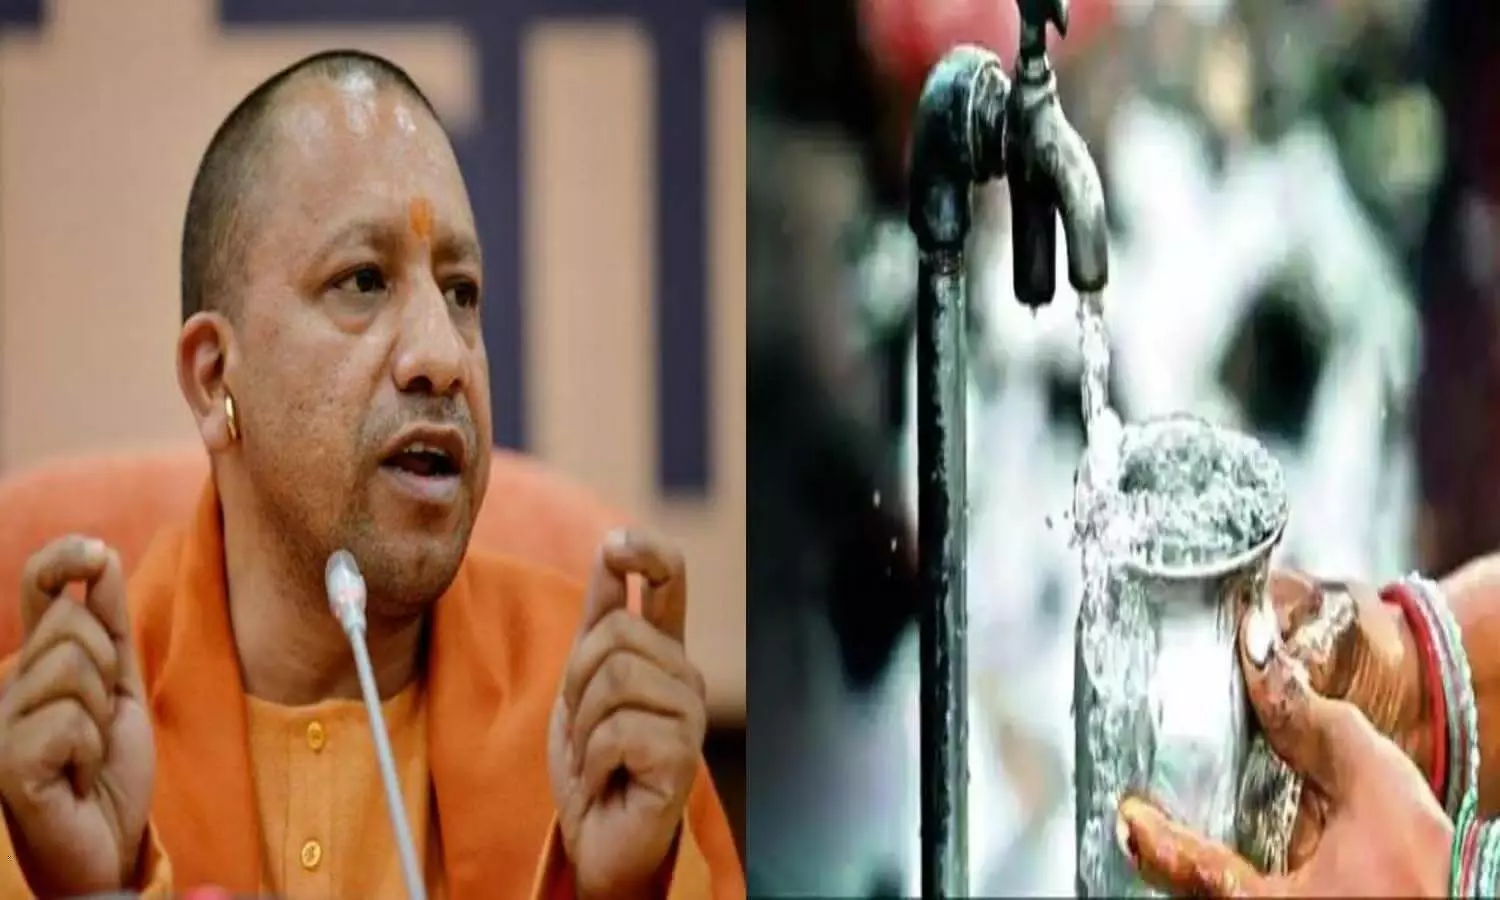 Water will reach every house of Bundelkhand from tap by December, CM Yogi announced